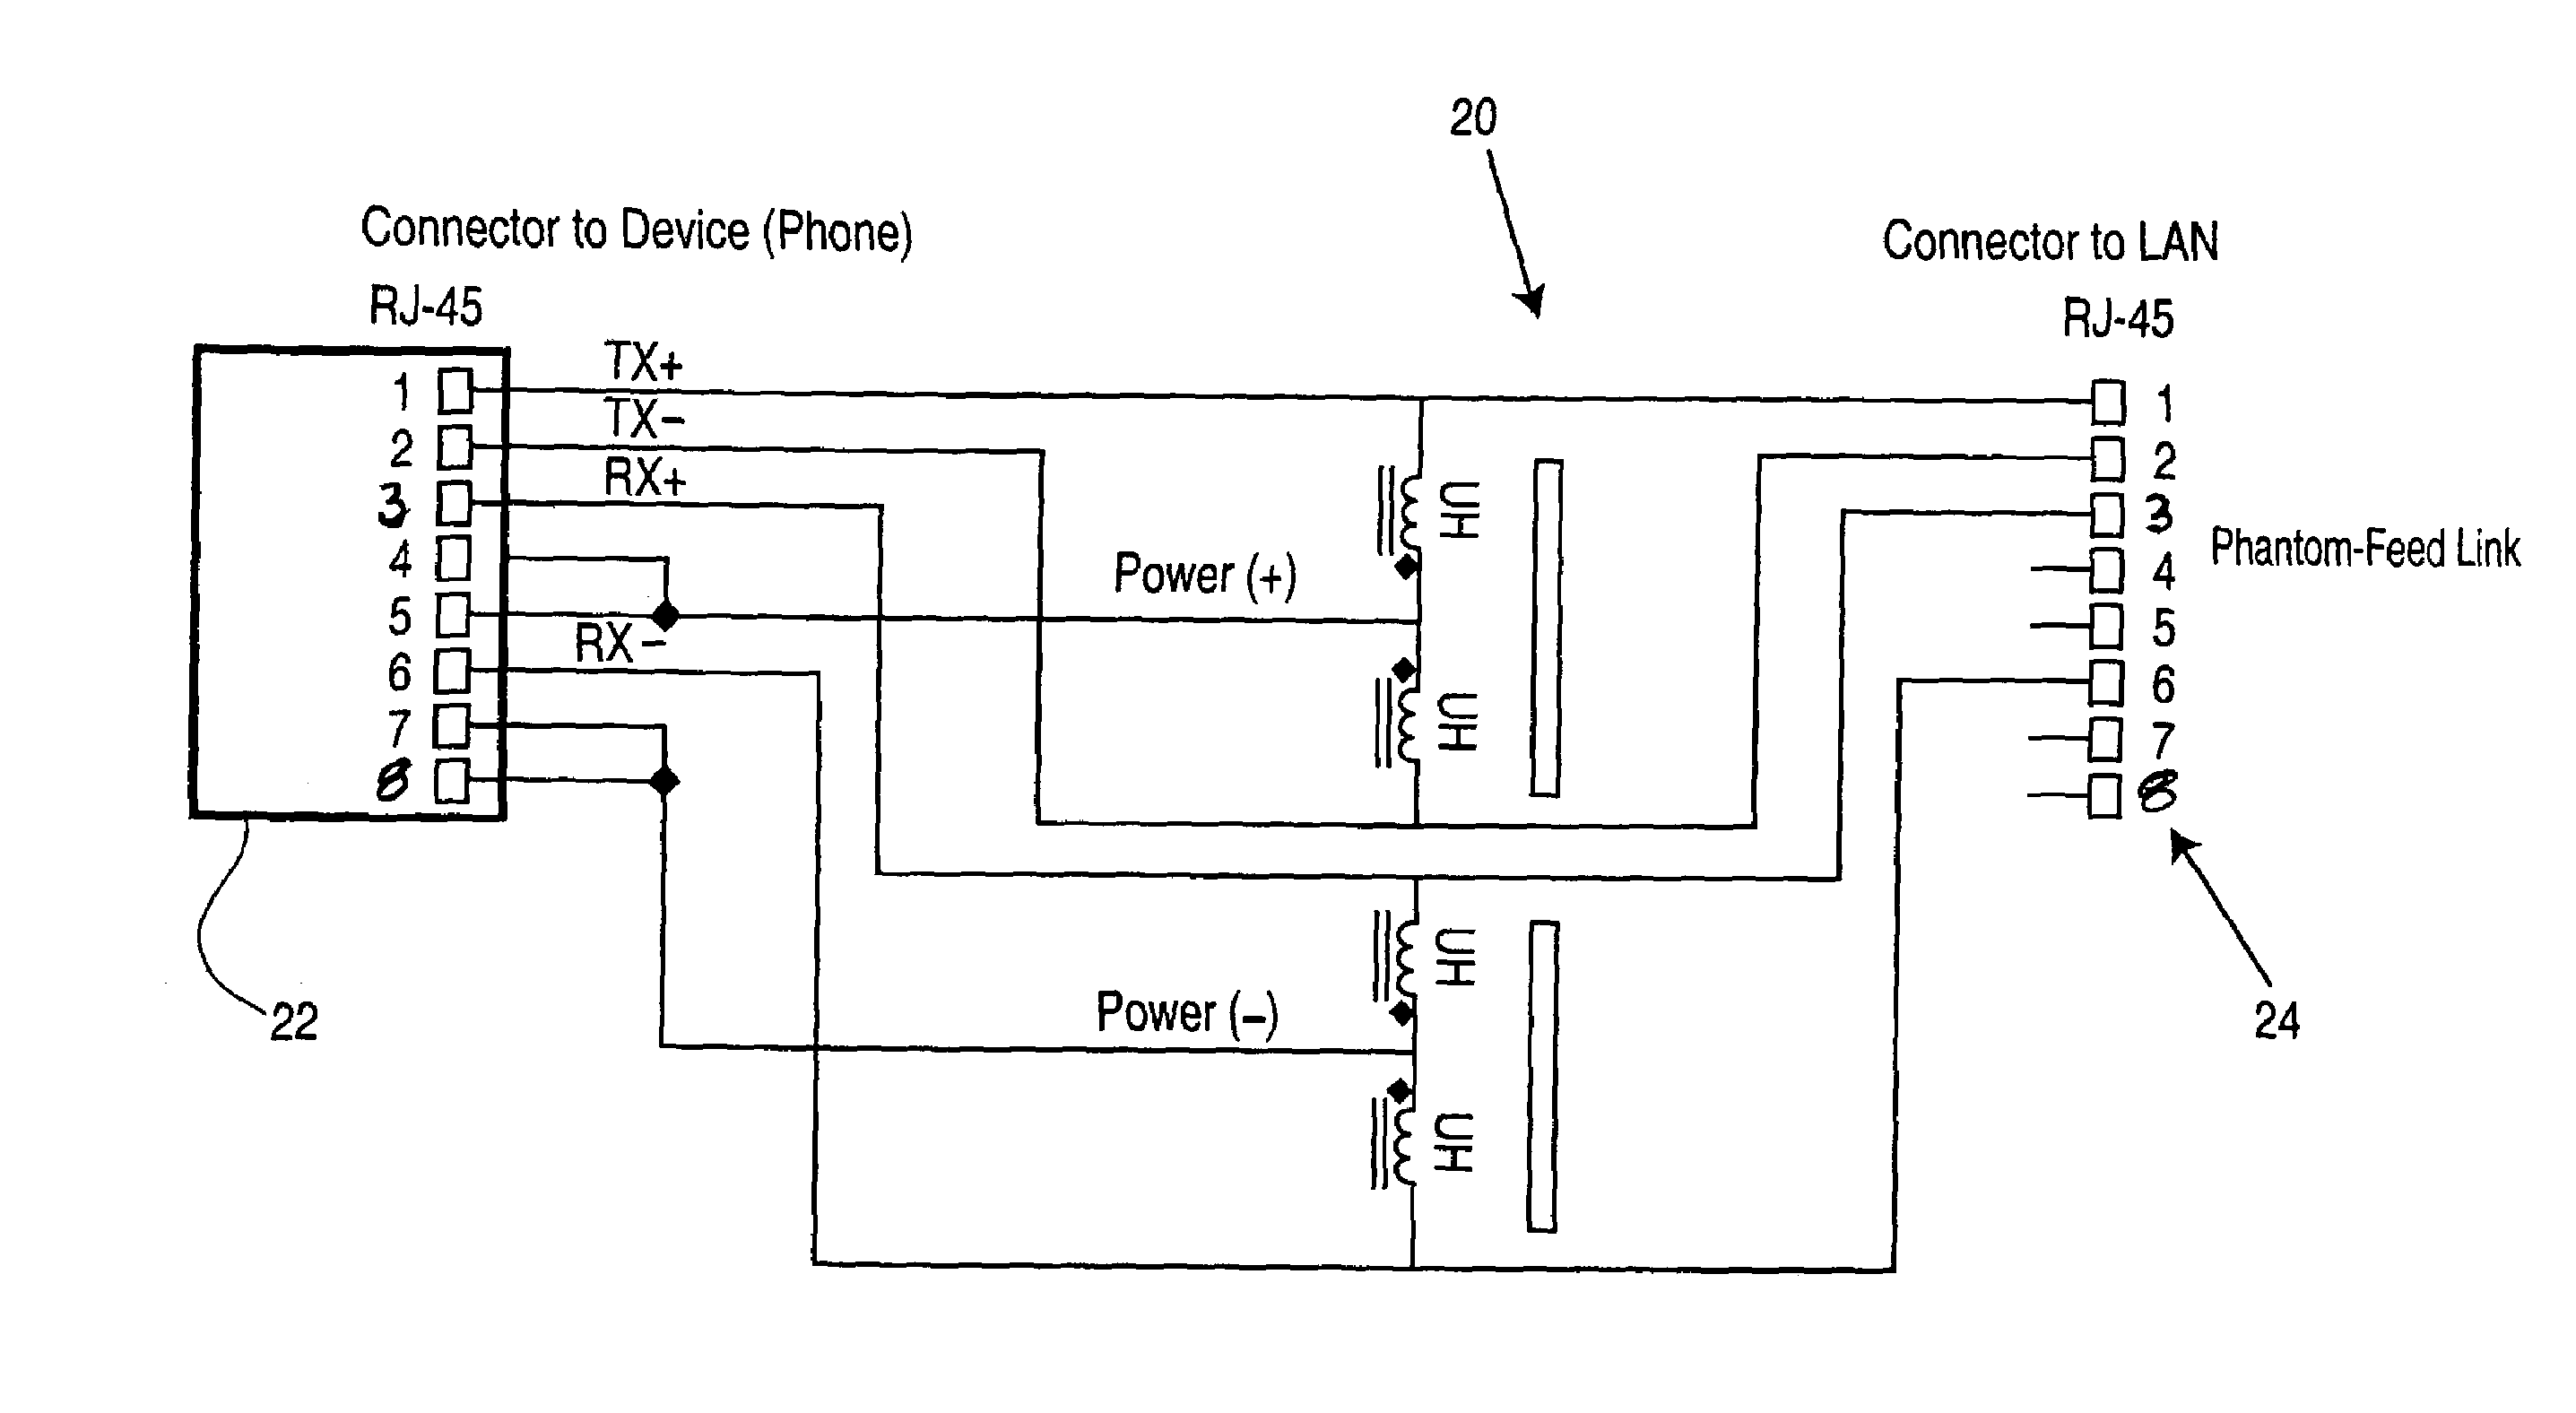 Power supply for phantom-feed LAN connected device using spare-pair powering